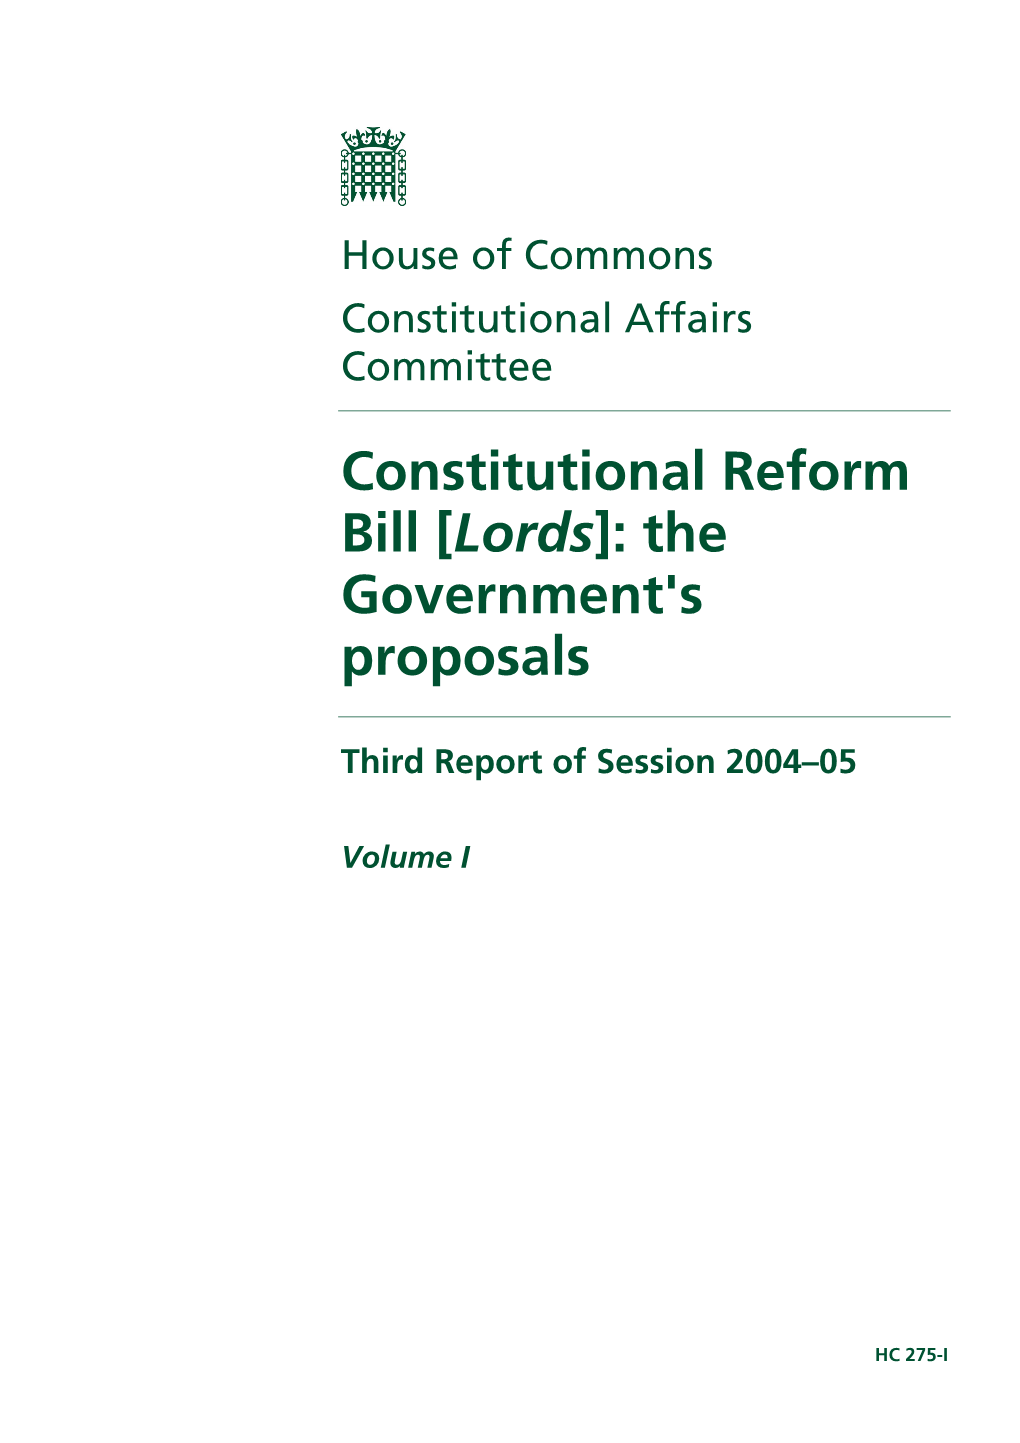 Constitutional Reform Bill [Lords]: the Government's Proposals